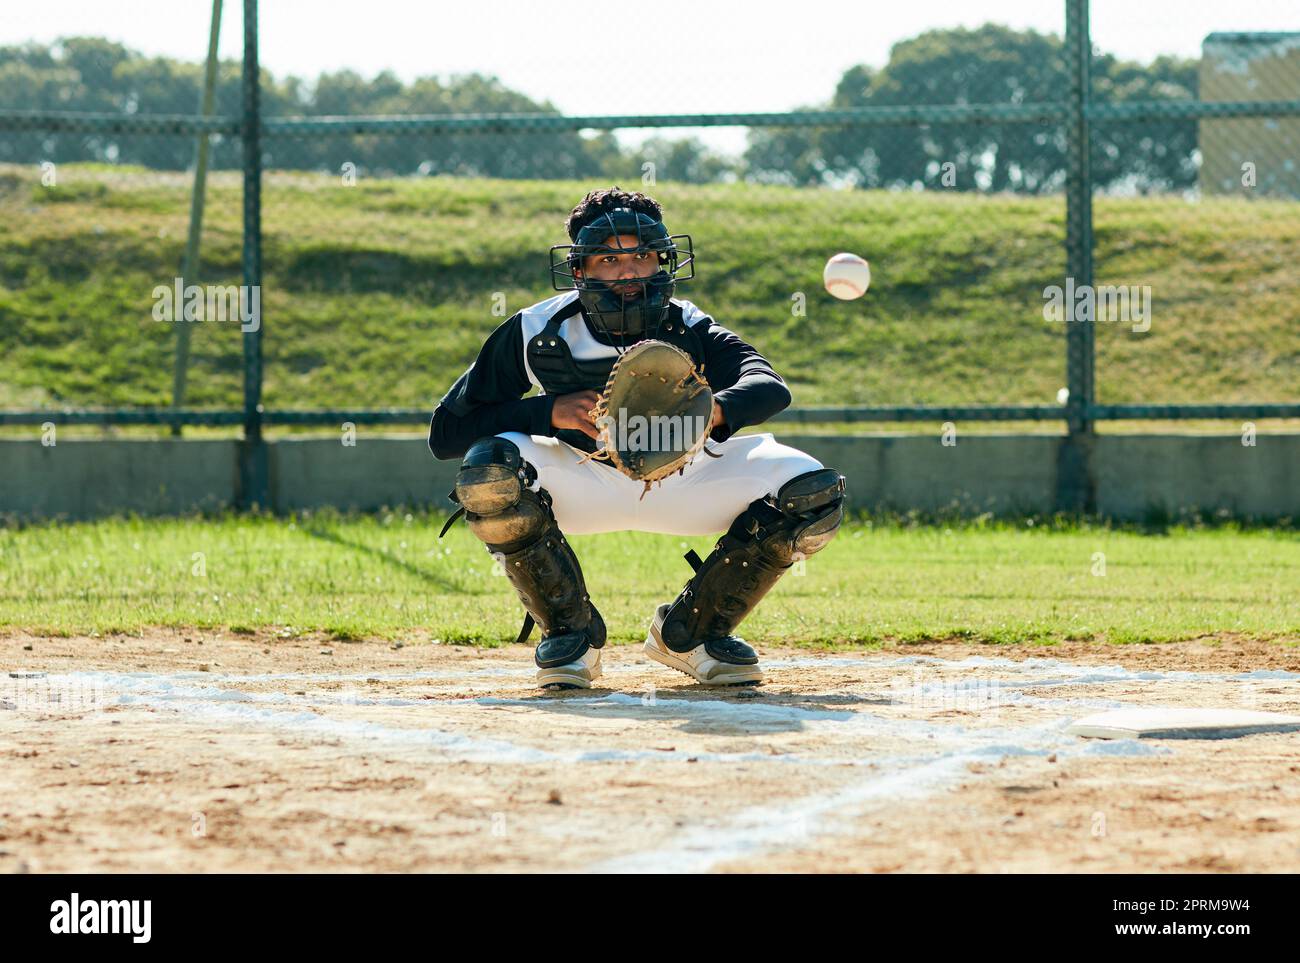 Hes got it. Full length shot of a handsome young baseball player catching a ball during a game on the field Stock Photo